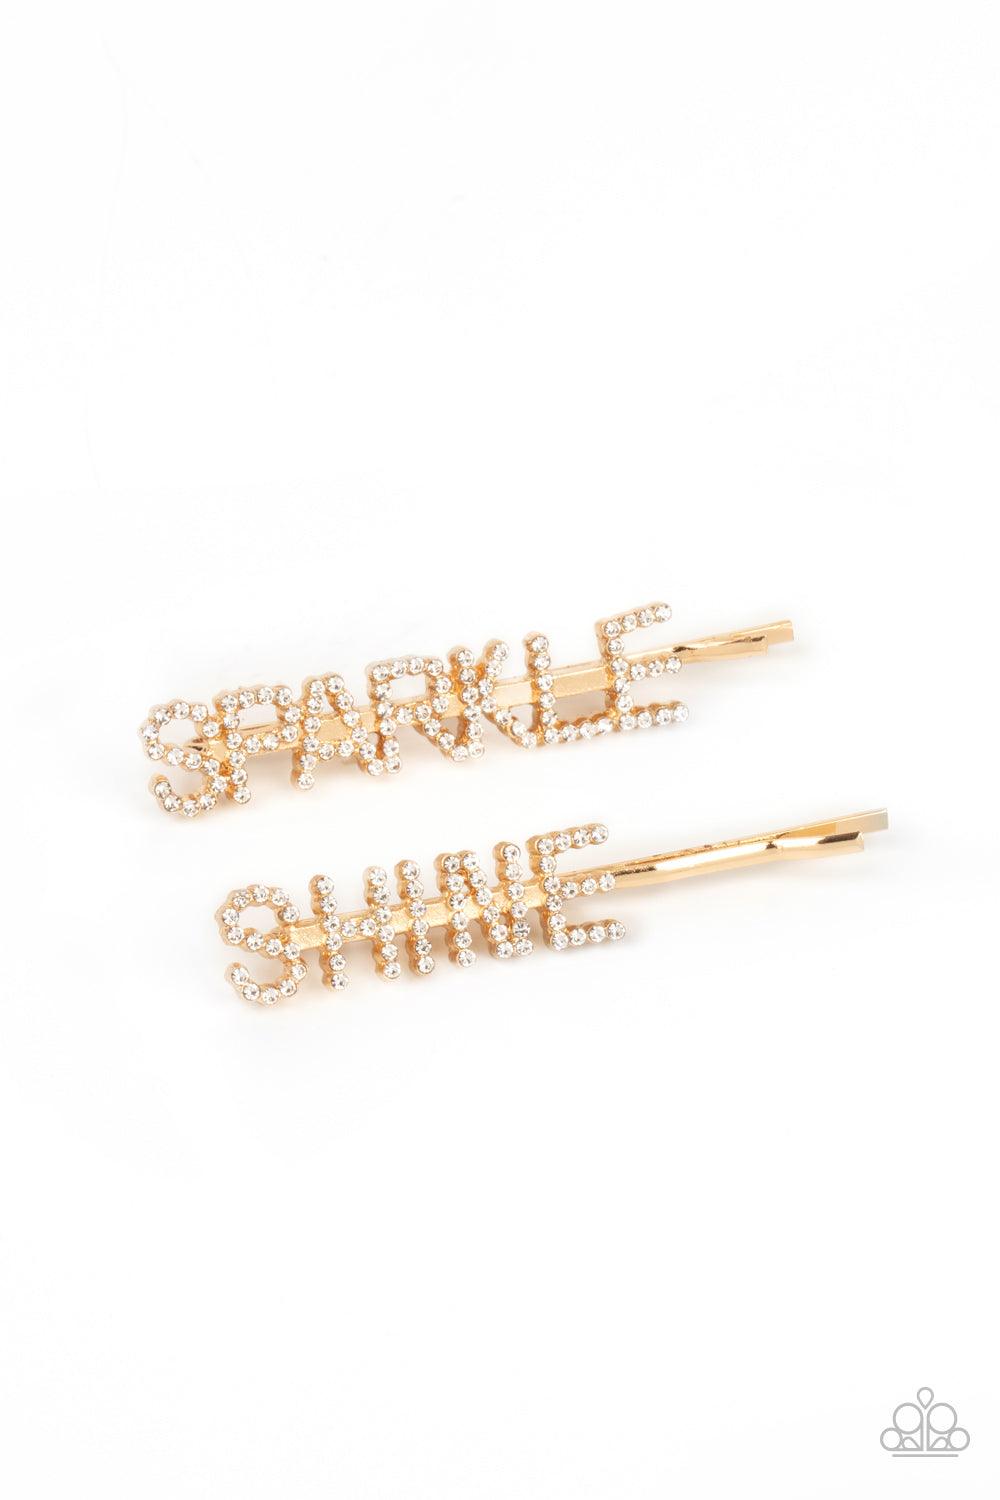 Paparazzi Accessories Center of the SPARKLE-verse - Gold Glassy white rhinestones spell out "Sparkle," and "Shine," across the fronts of two gold bobby pins, creating a sparkly duo. Sold as one pair of decorative bobby pins. Hair Claws & Clips